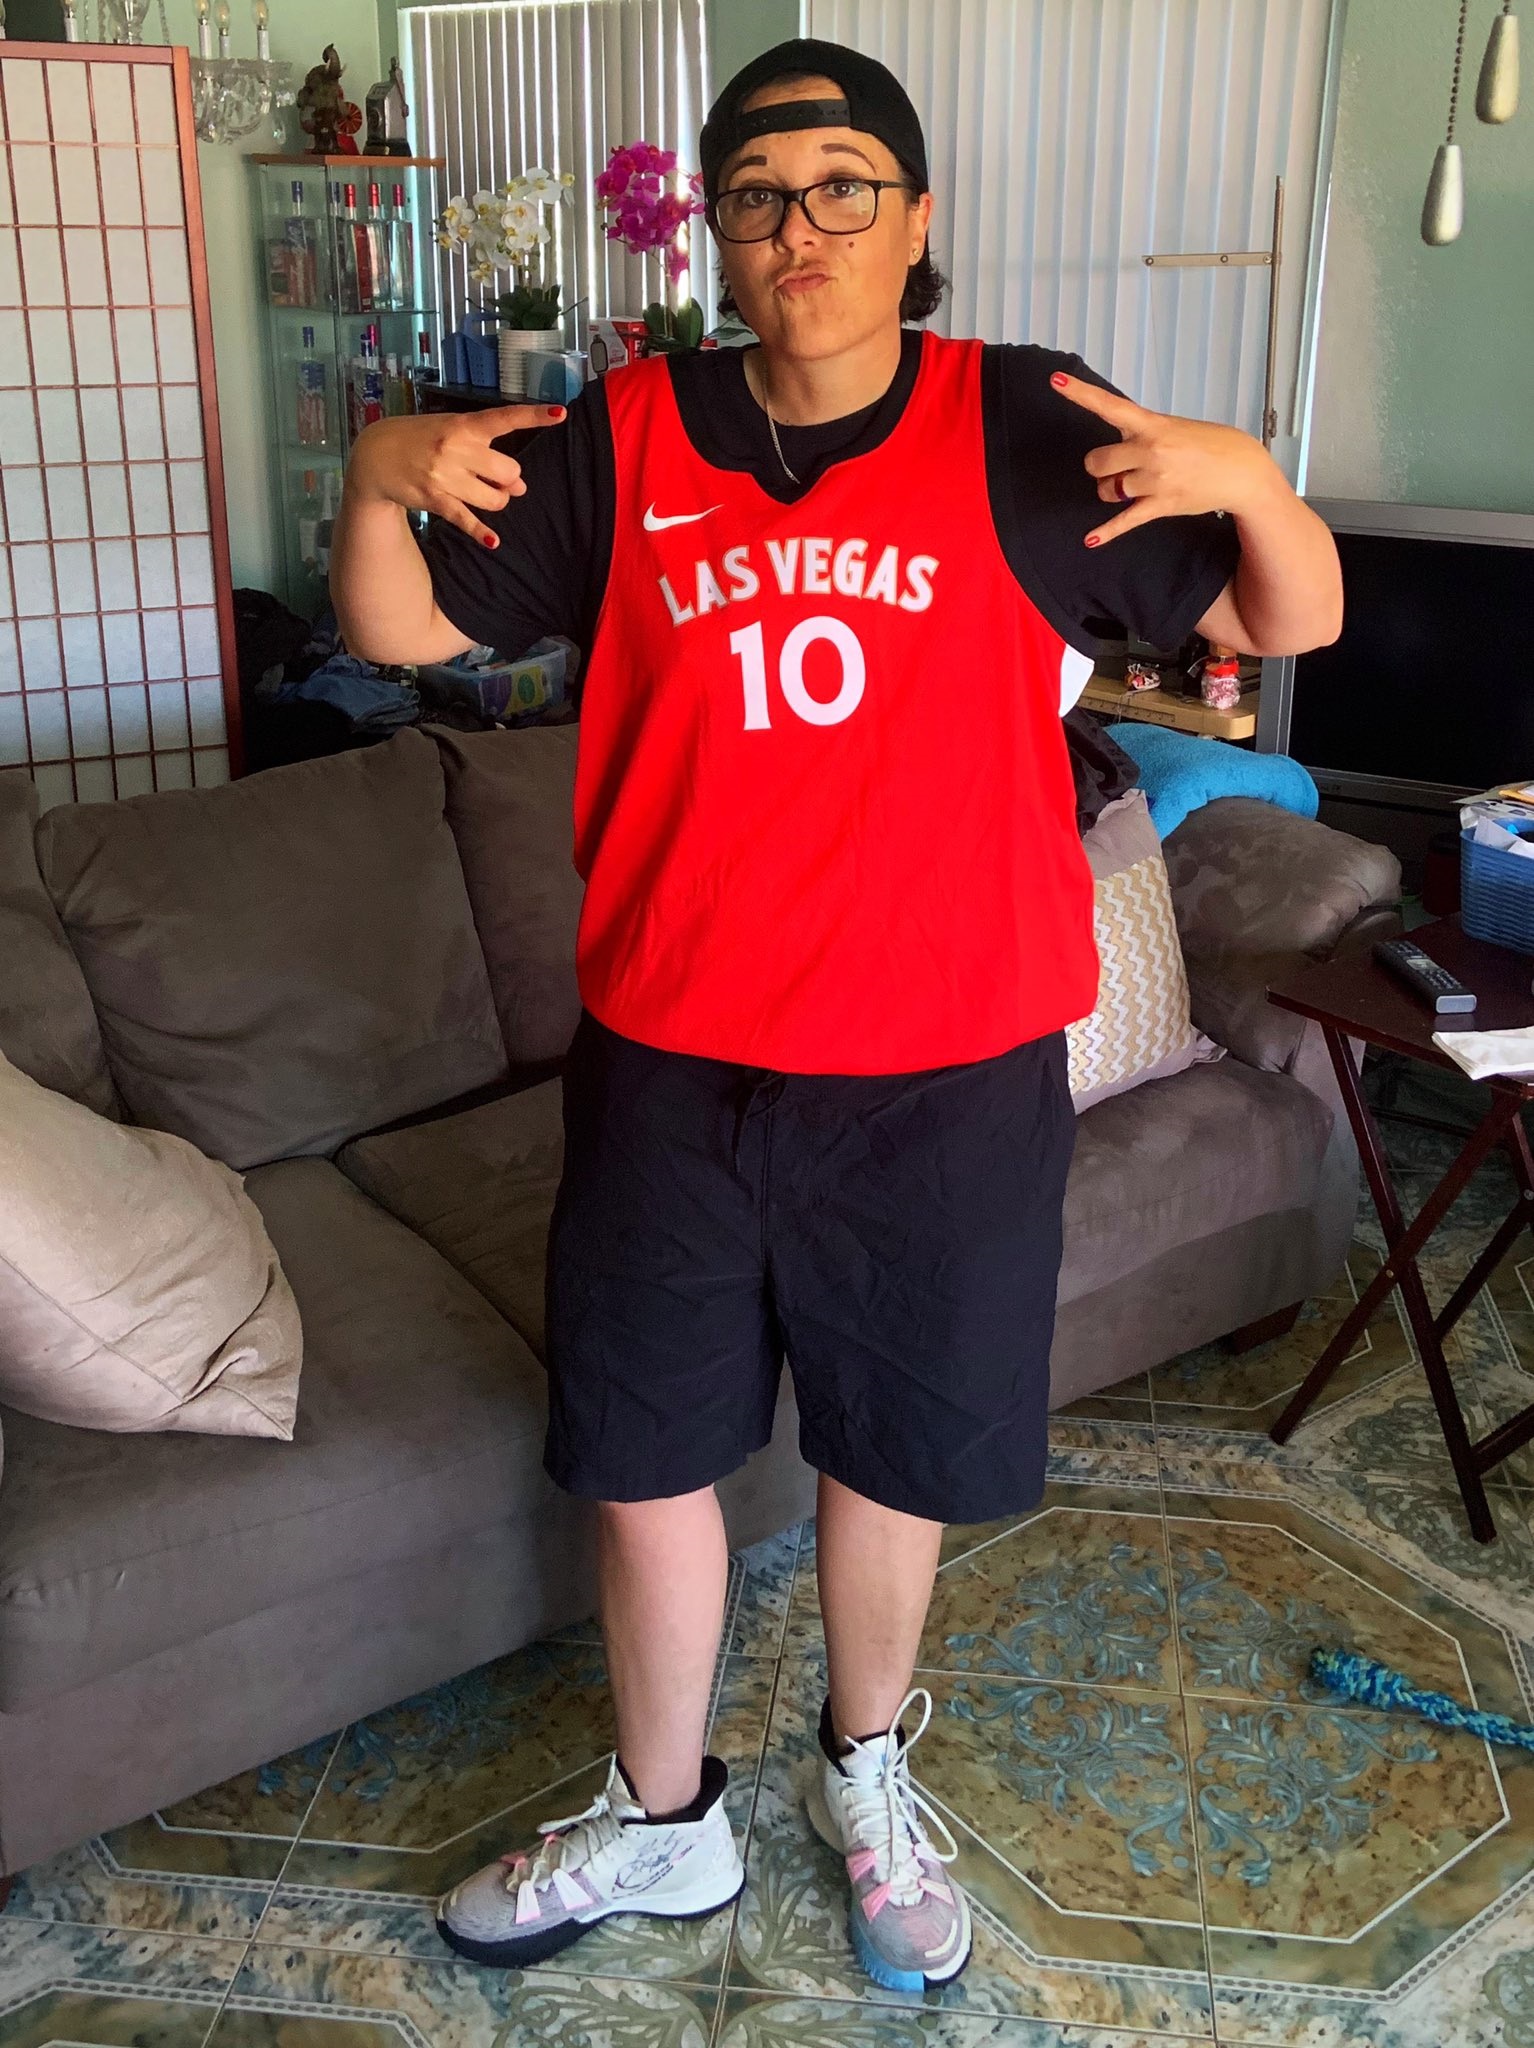 WNBA fan Ashleigh Ahrens posing in a jersey while standing in a living room.